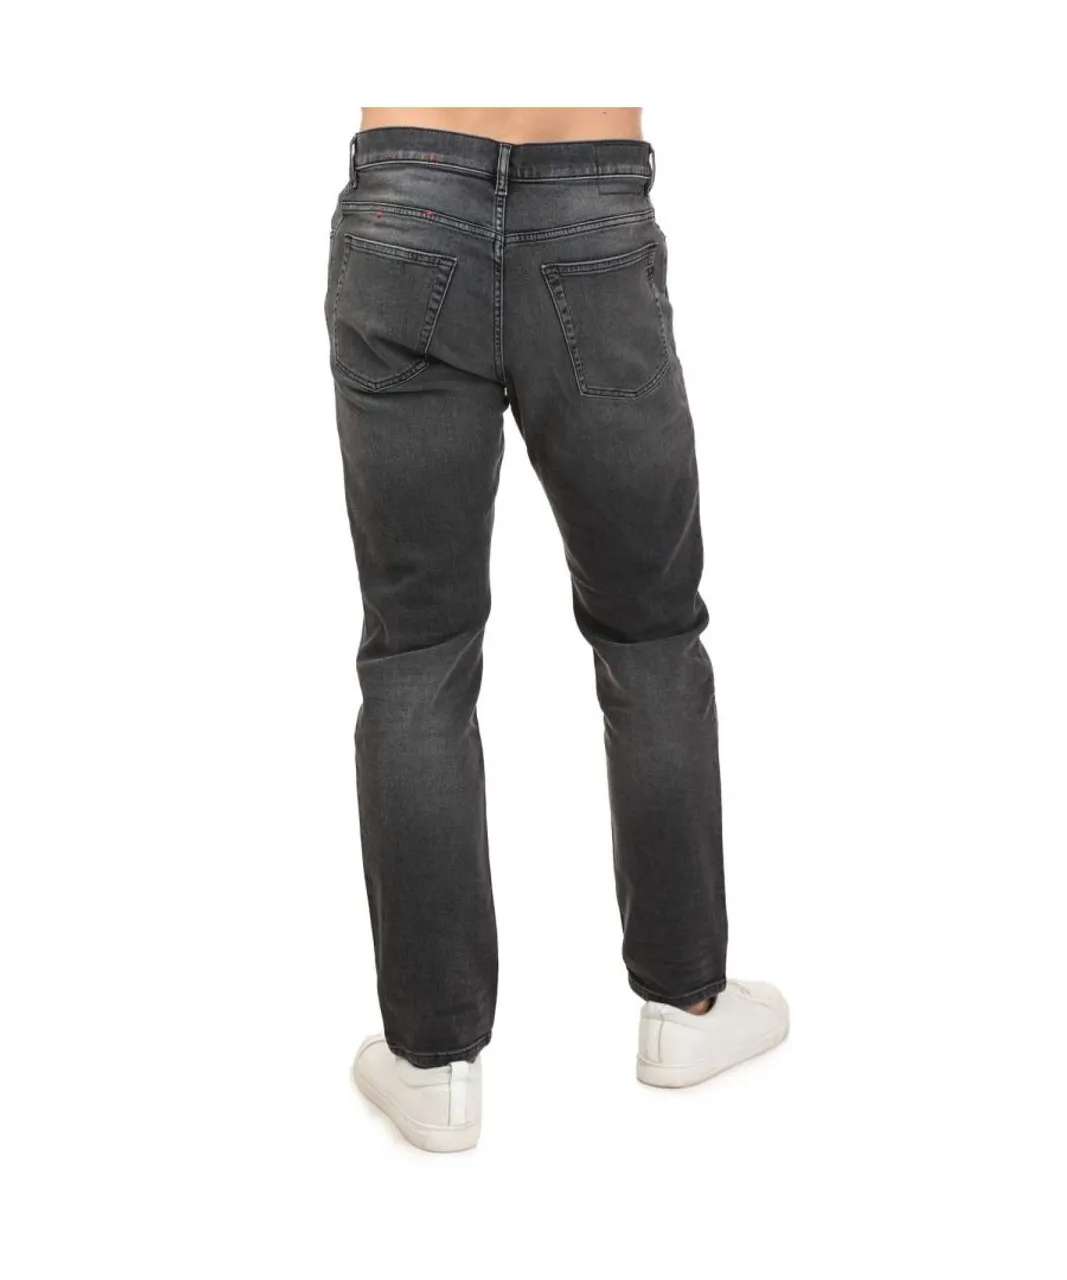 Diesel Mens D-Fining Tapered Jeans in Black Cotton